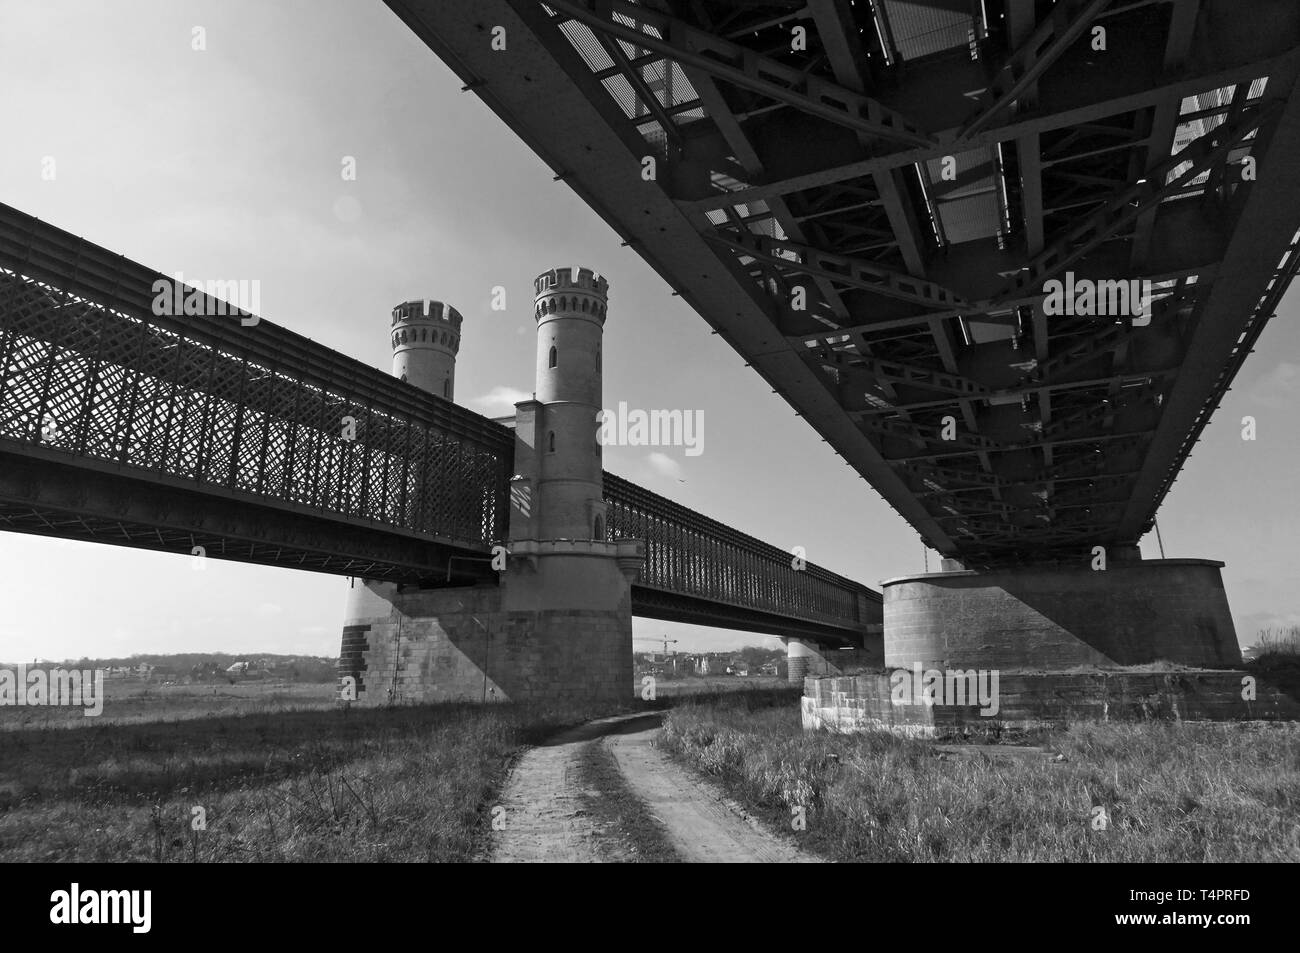 Two towers bridge Black and White Stock Photos & Images - Alamy